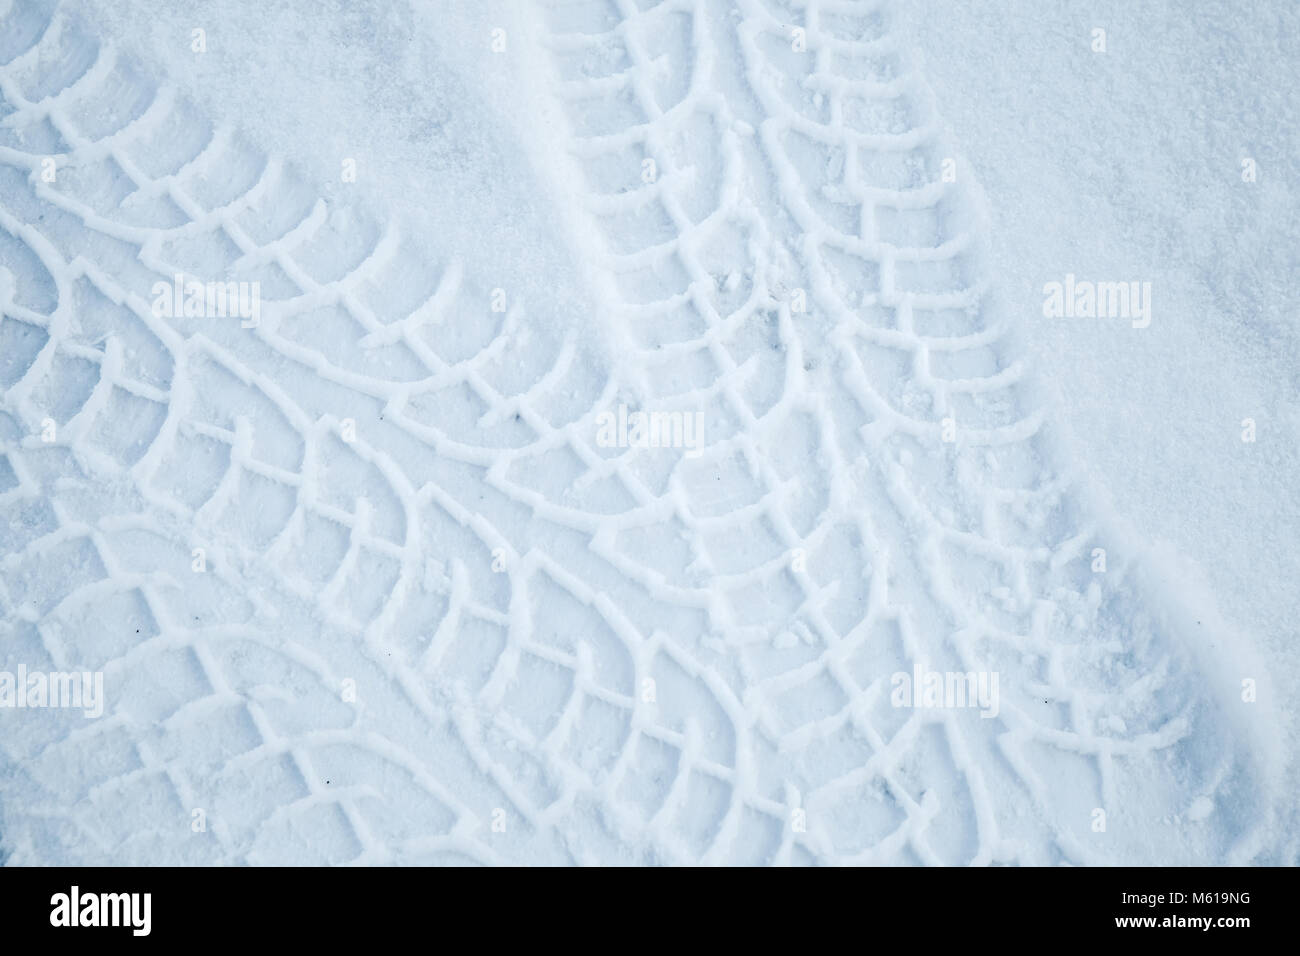 Tire tracks pattern on winter road with snow. Background texture Stock Photo